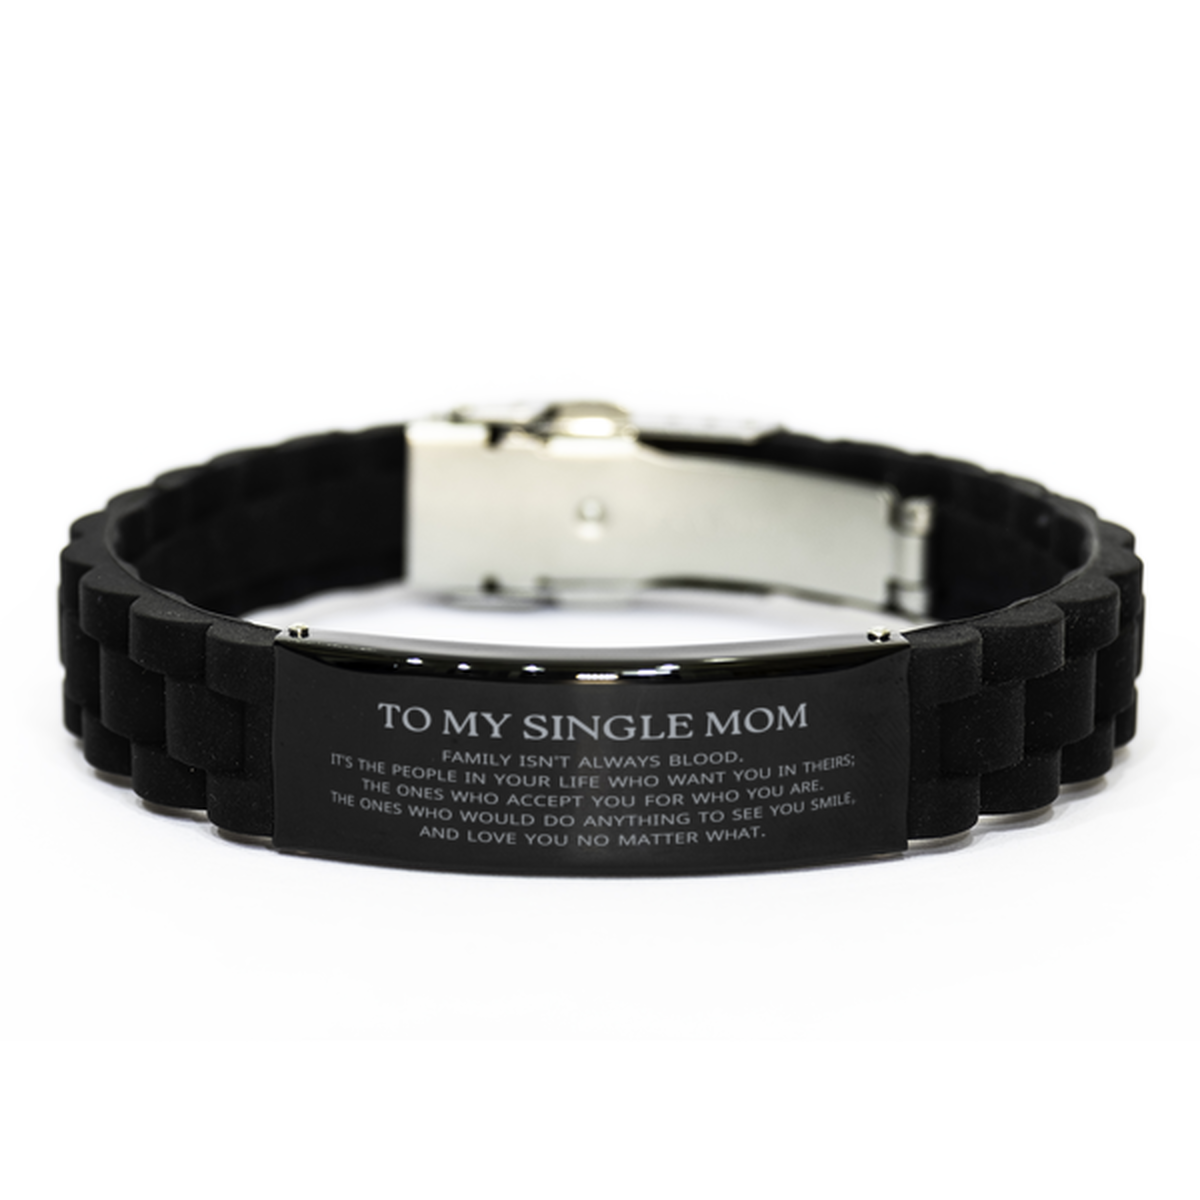 To My Single Mom Gifts, Family isn't always blood, Single Mom Black Glidelock Clasp Bracelet, Birthday Christmas Unique Present For Single Mom